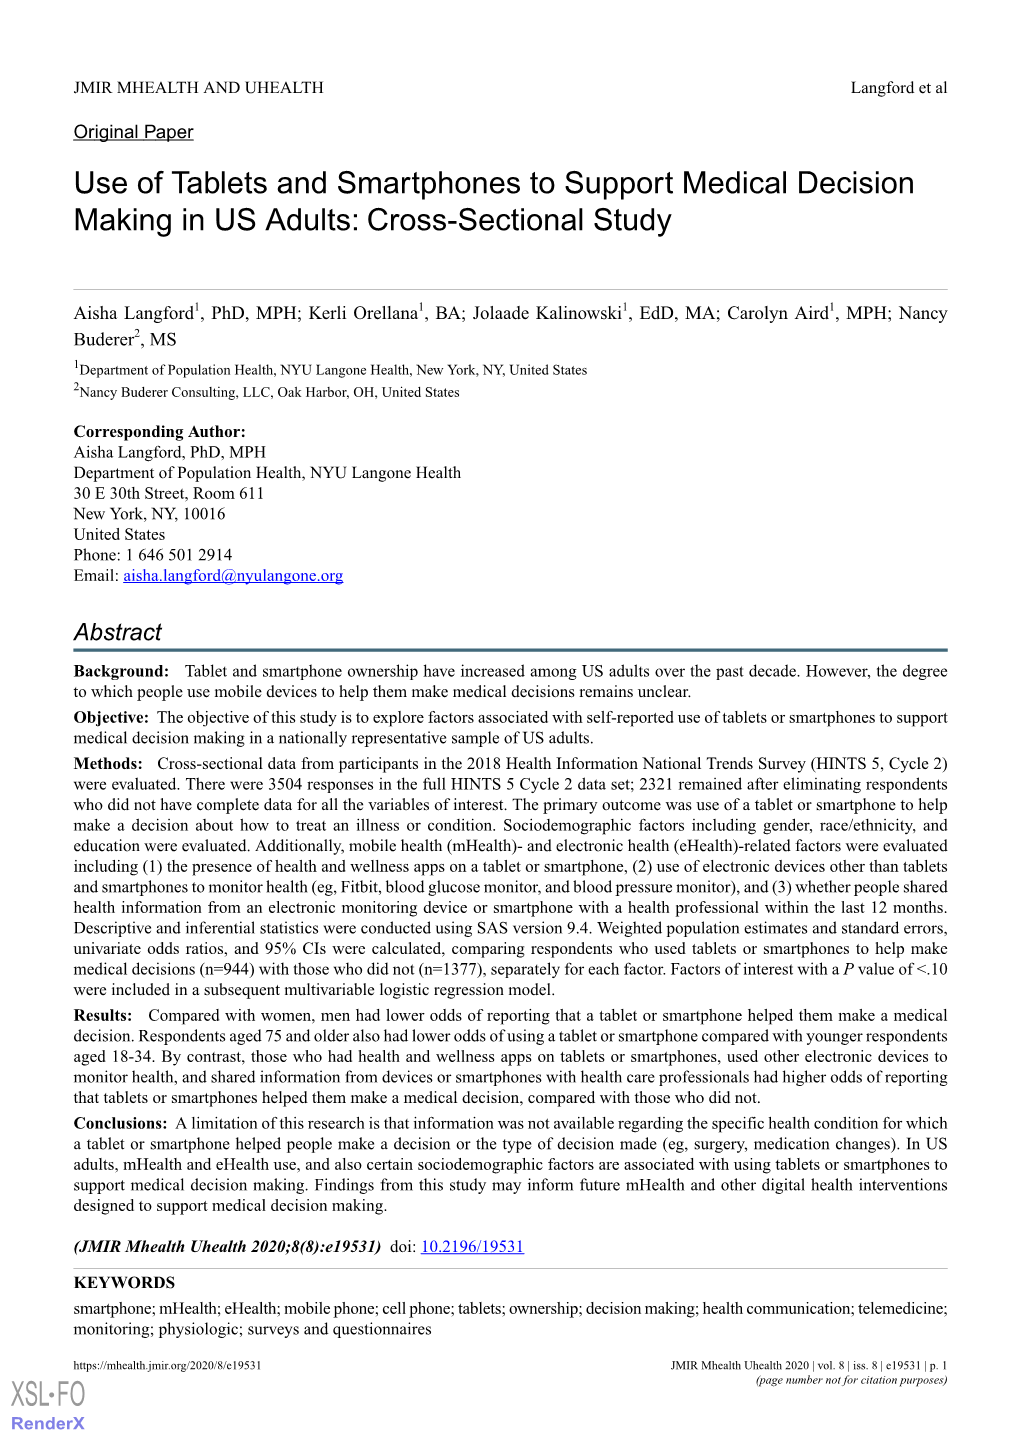 Use of Tablets and Smartphones to Support Medical Decision Making in US Adults: Cross-Sectional Study